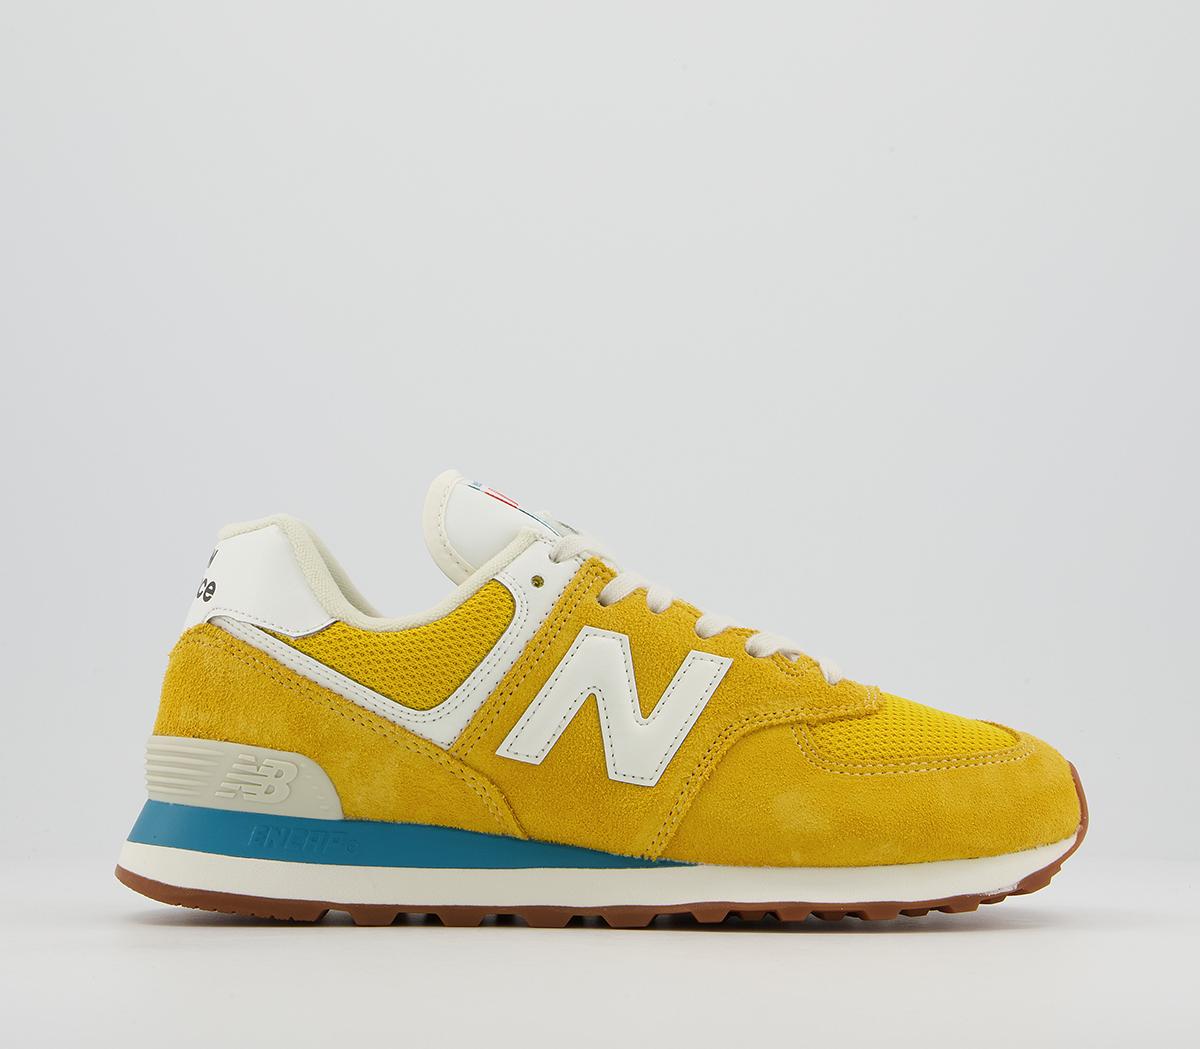 New Balance 574 Trainers Varsity Gold - His trainers